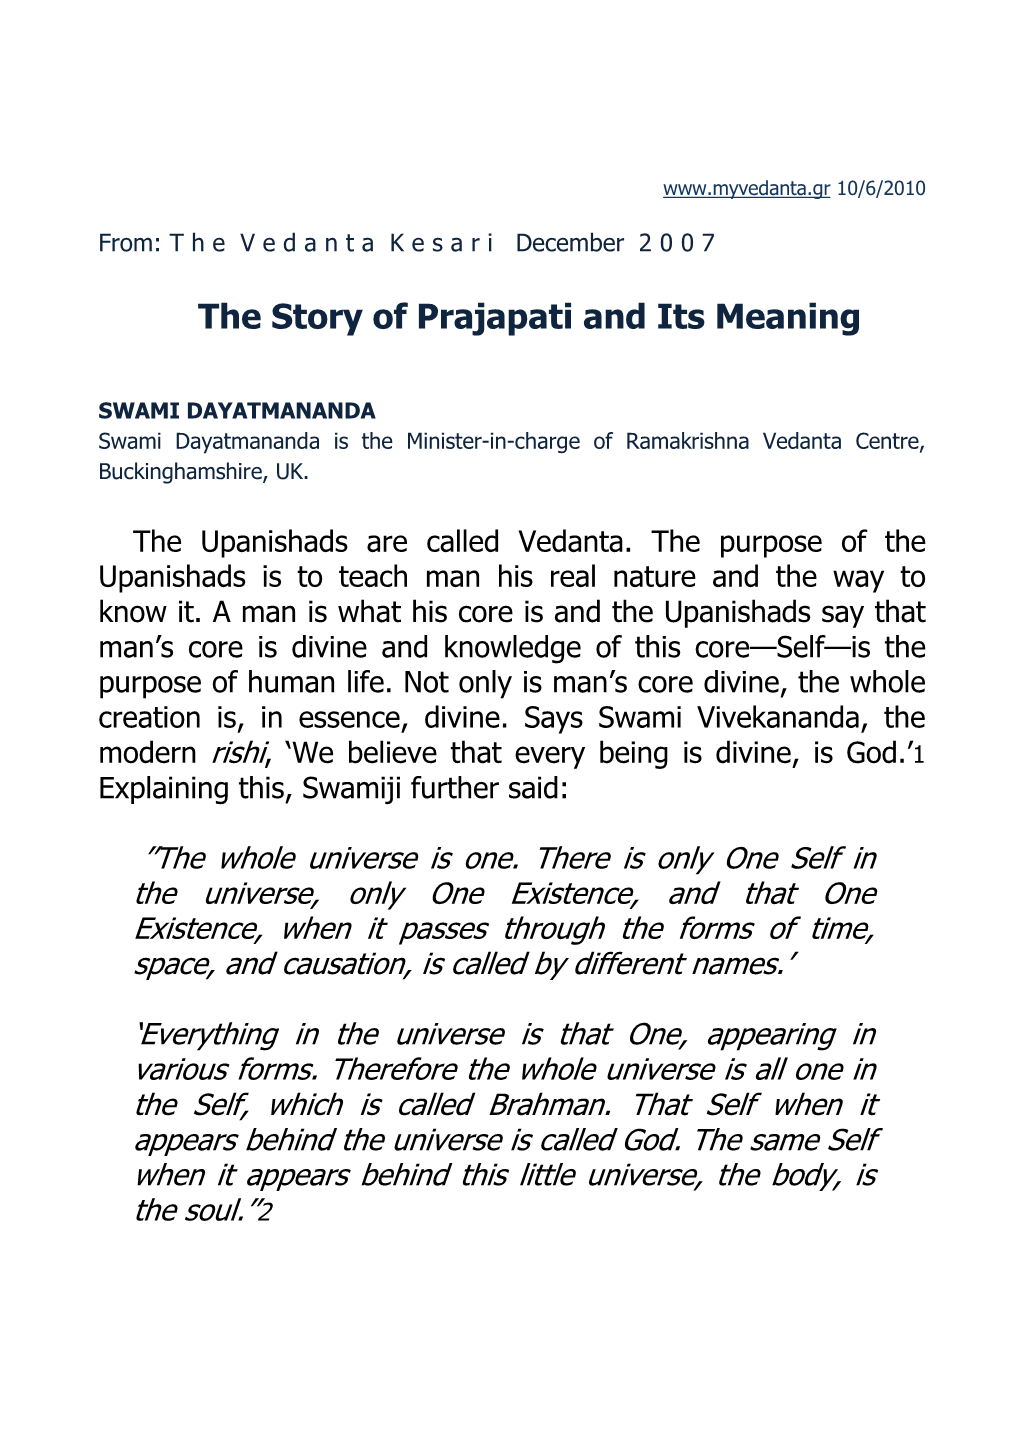 The Story of Prajapati and Its Meaning